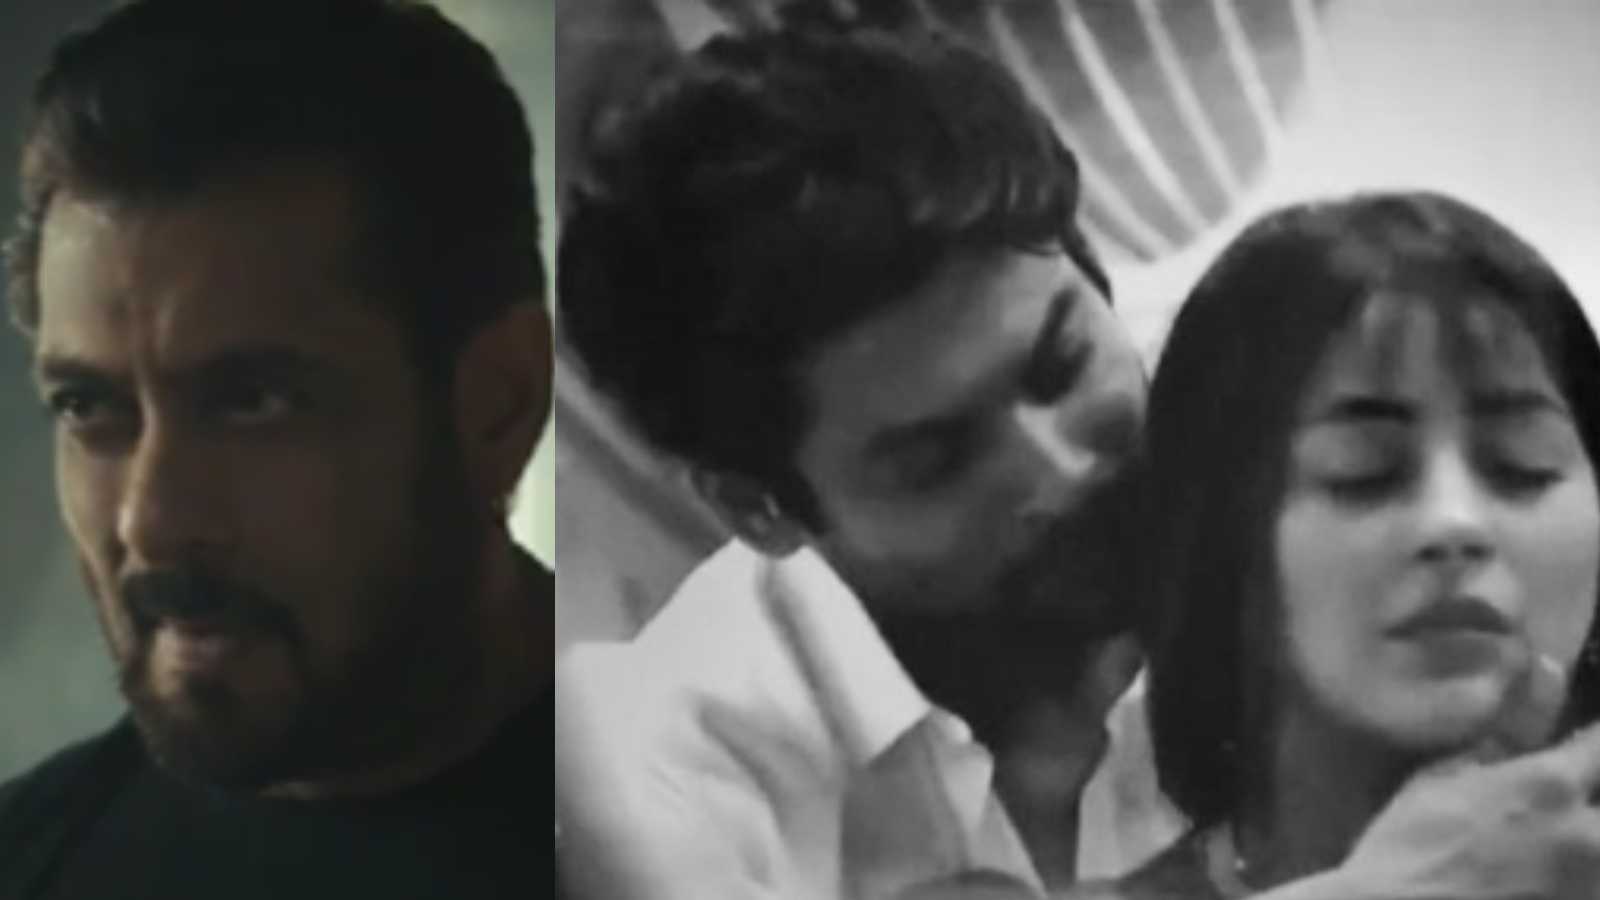 Sidnaaz will blossom forever' : Sidharth Shukla and Shehnaaz Gill's fans celebrate the pair being spotted on